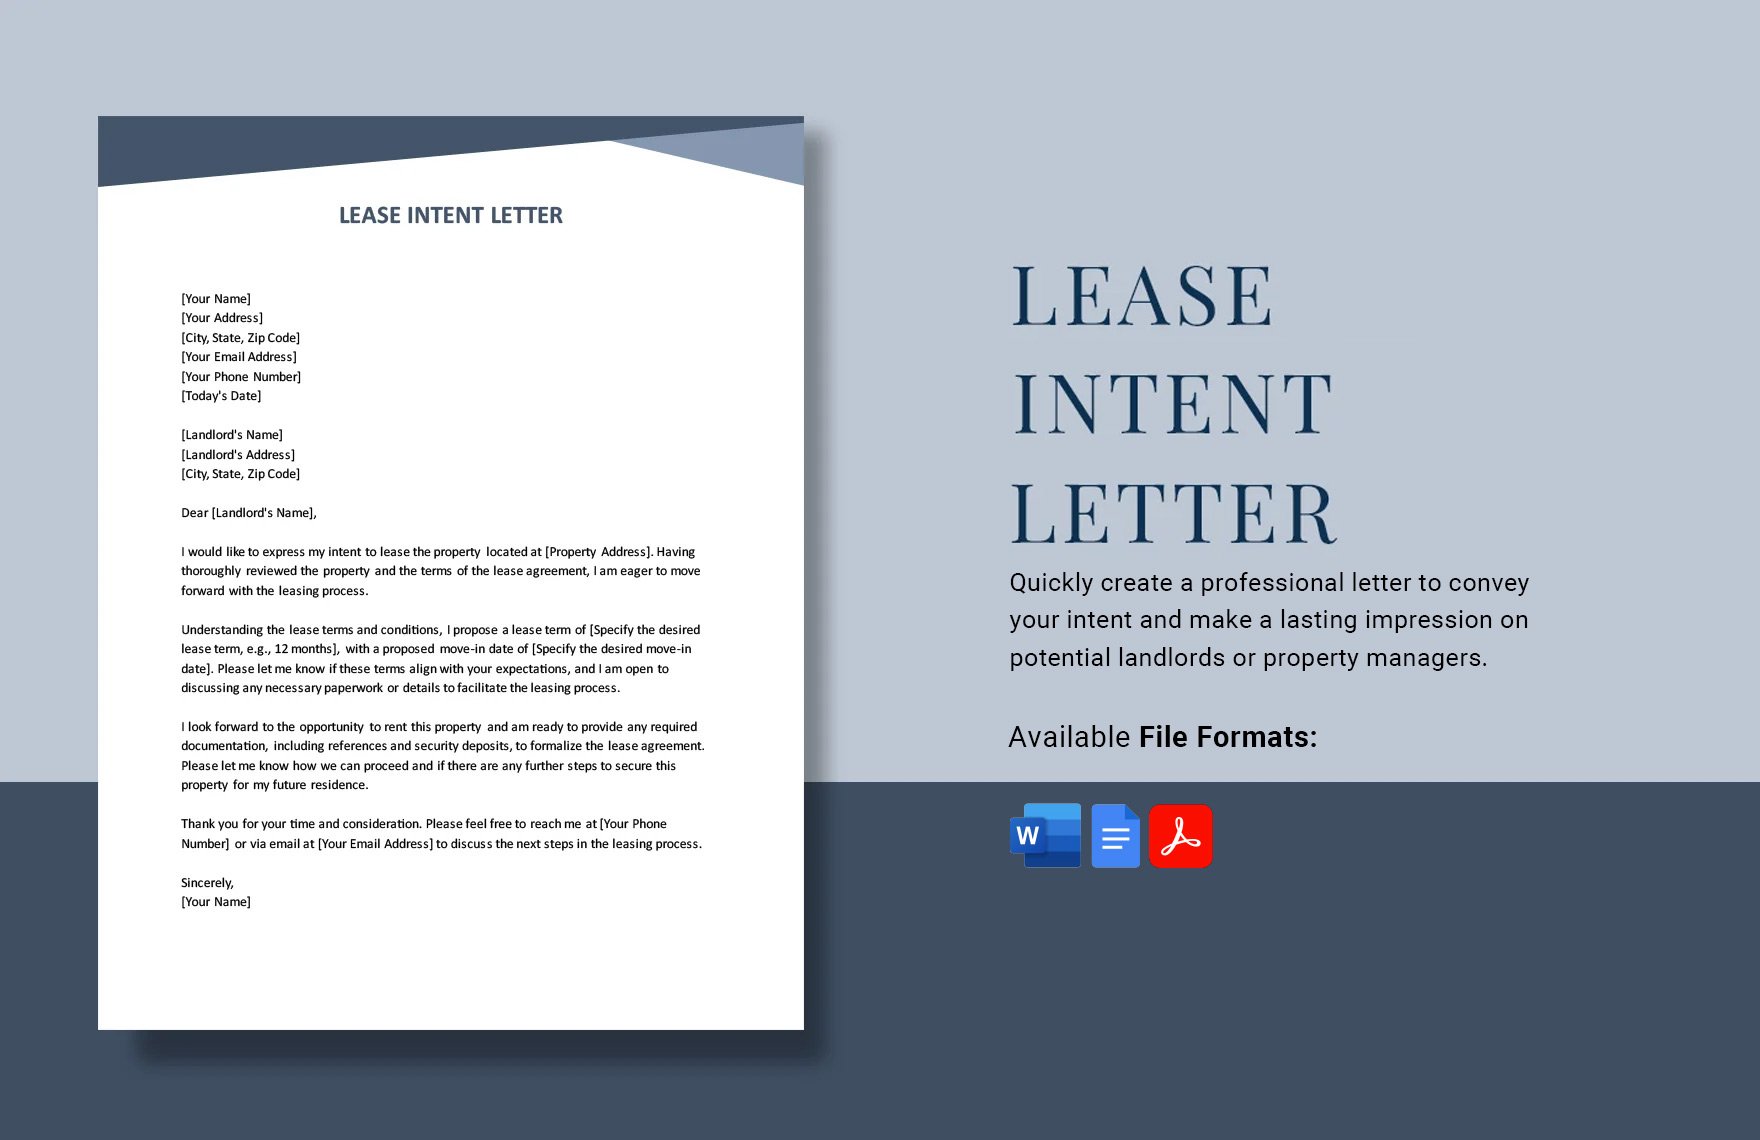 Lease Intent Letter in Word, Google Docs, PDF